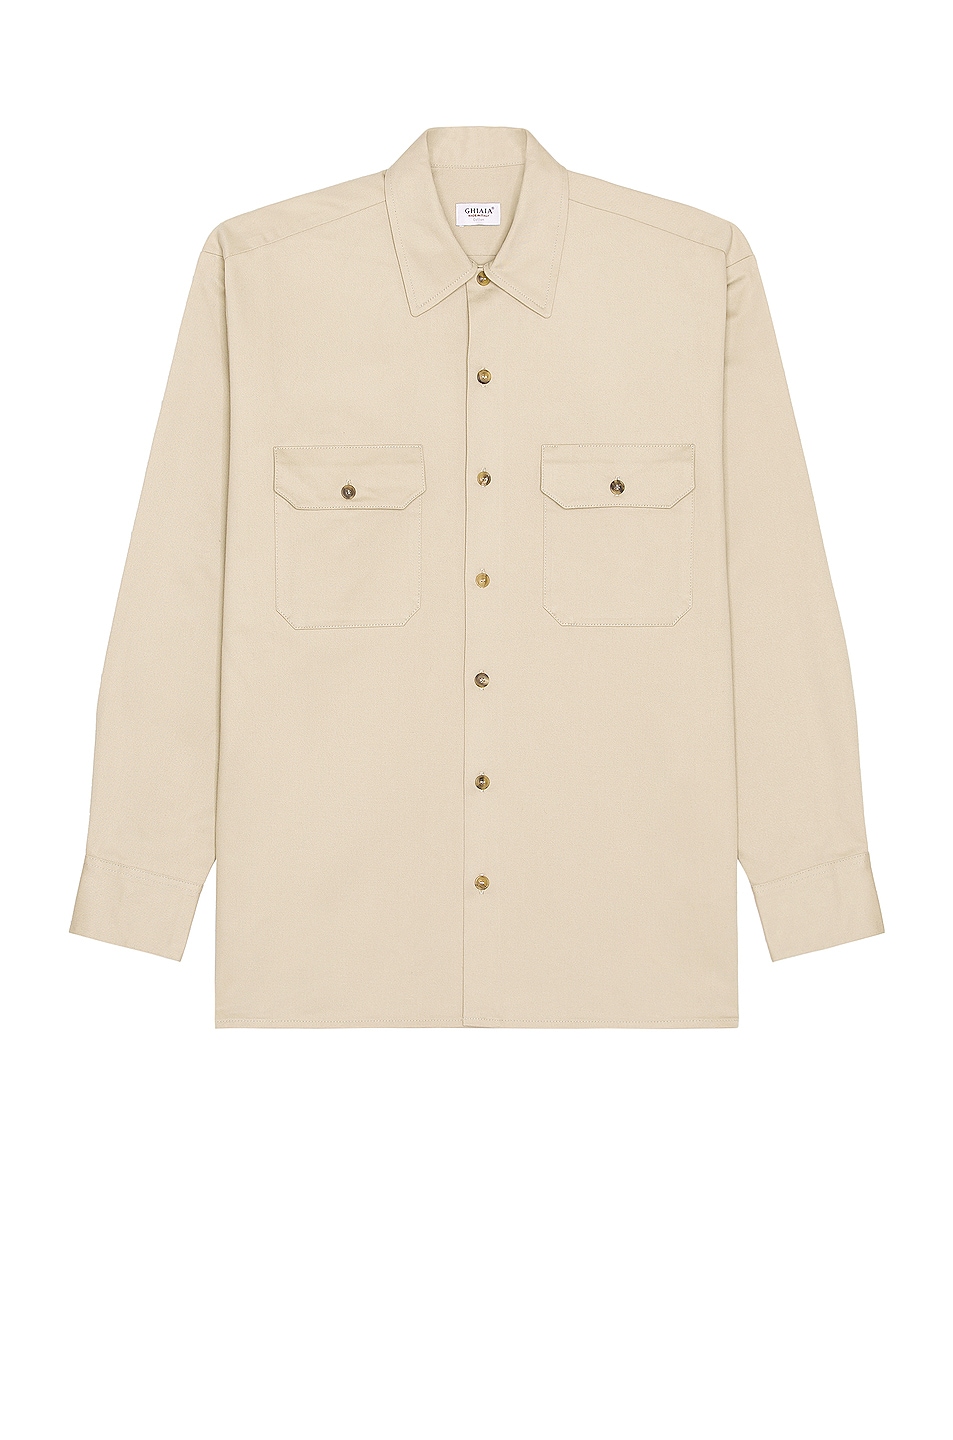 Image 1 of Ghiaia Cashmere Cotton Working Shirt in Sand